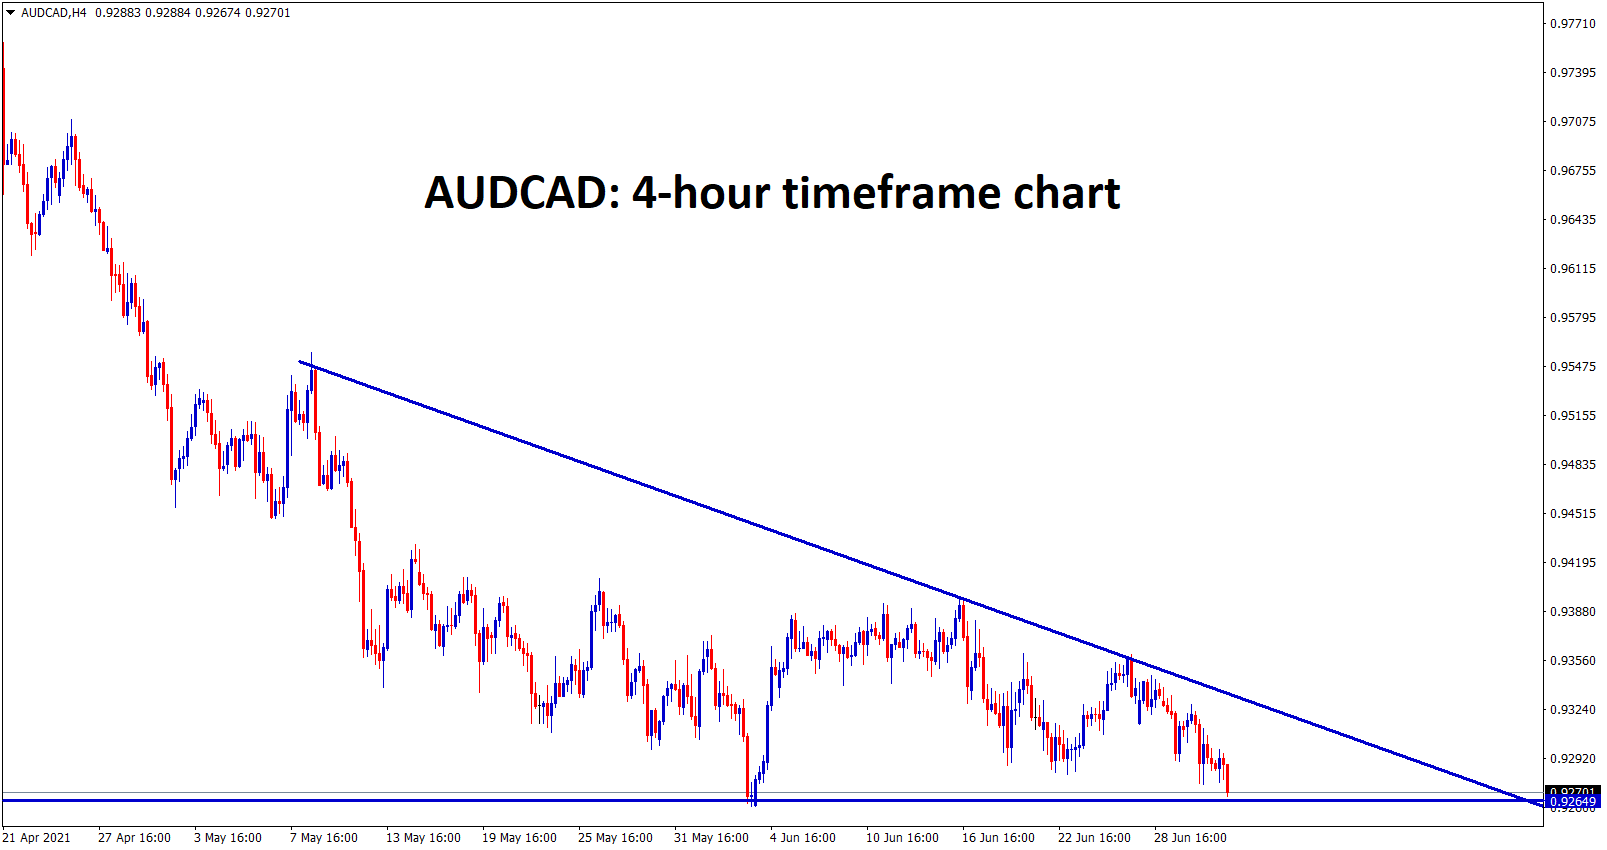 AUDCAD has formed a Descending Triangle pattern in the H4 chart